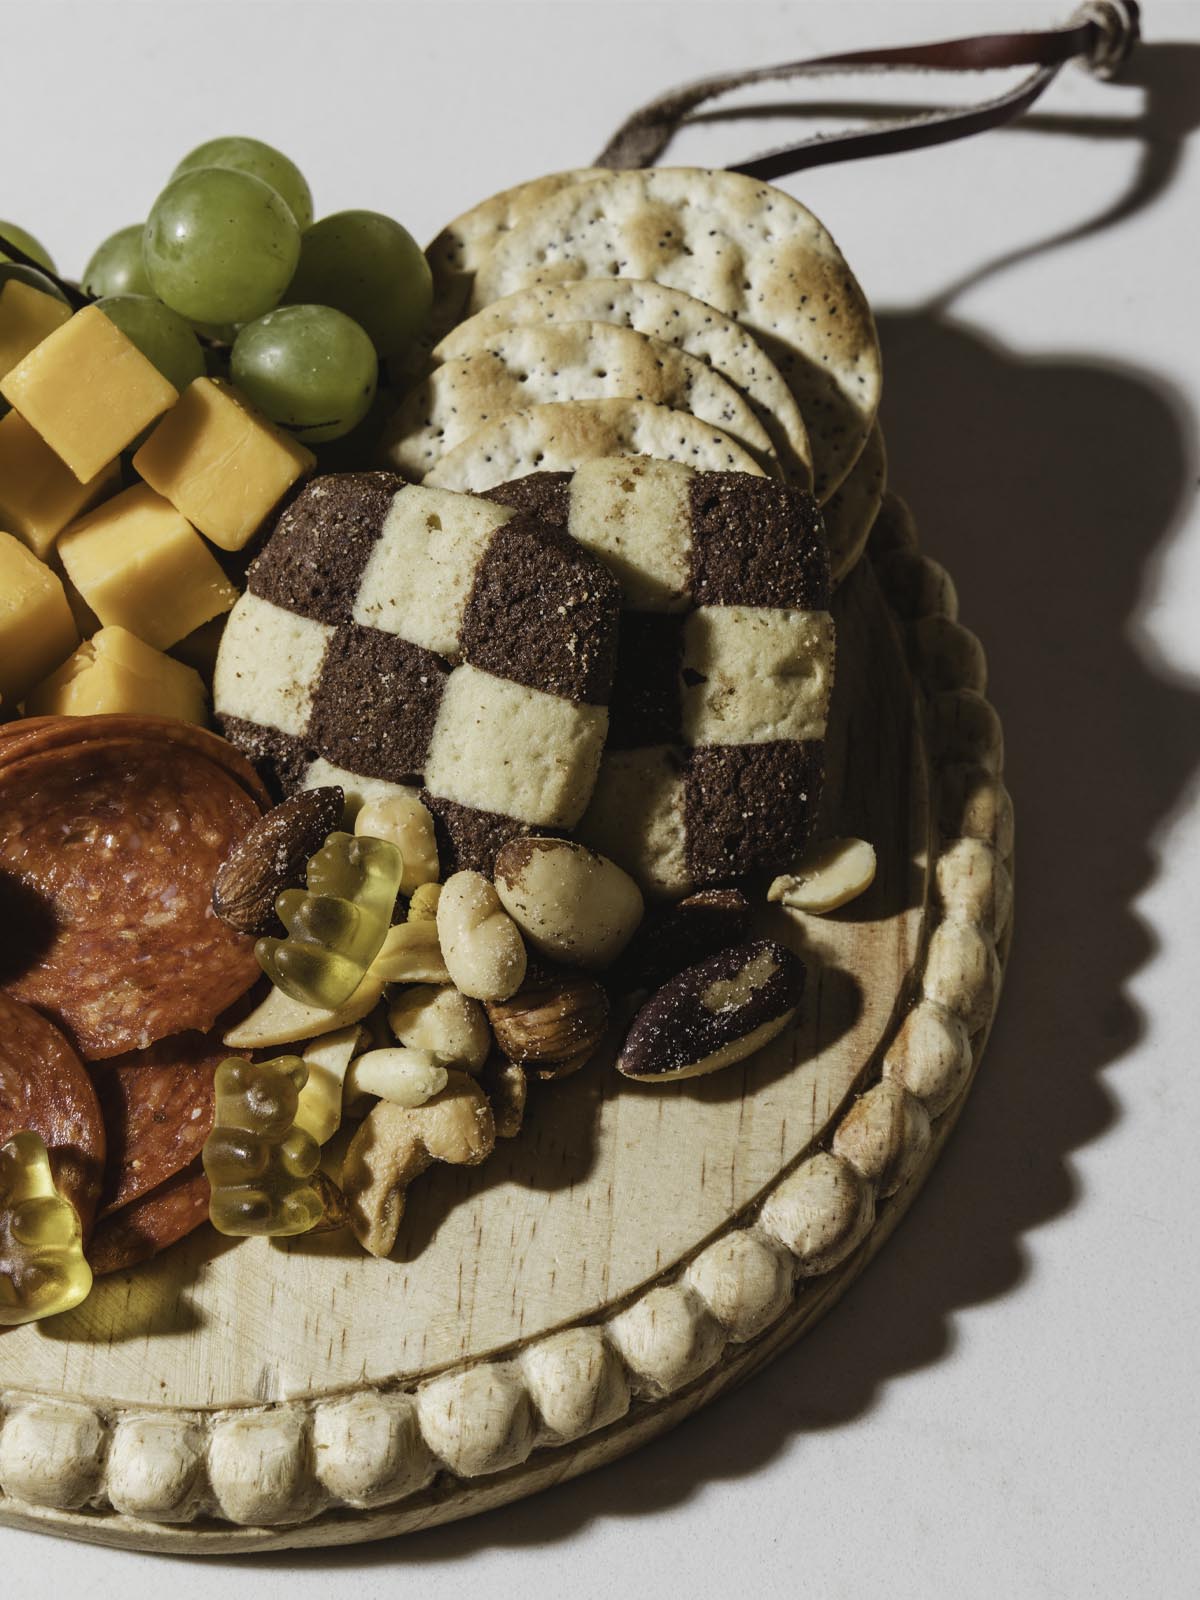 Round wooden board with cookies, crackers, cheese, meat and grapes on top of it